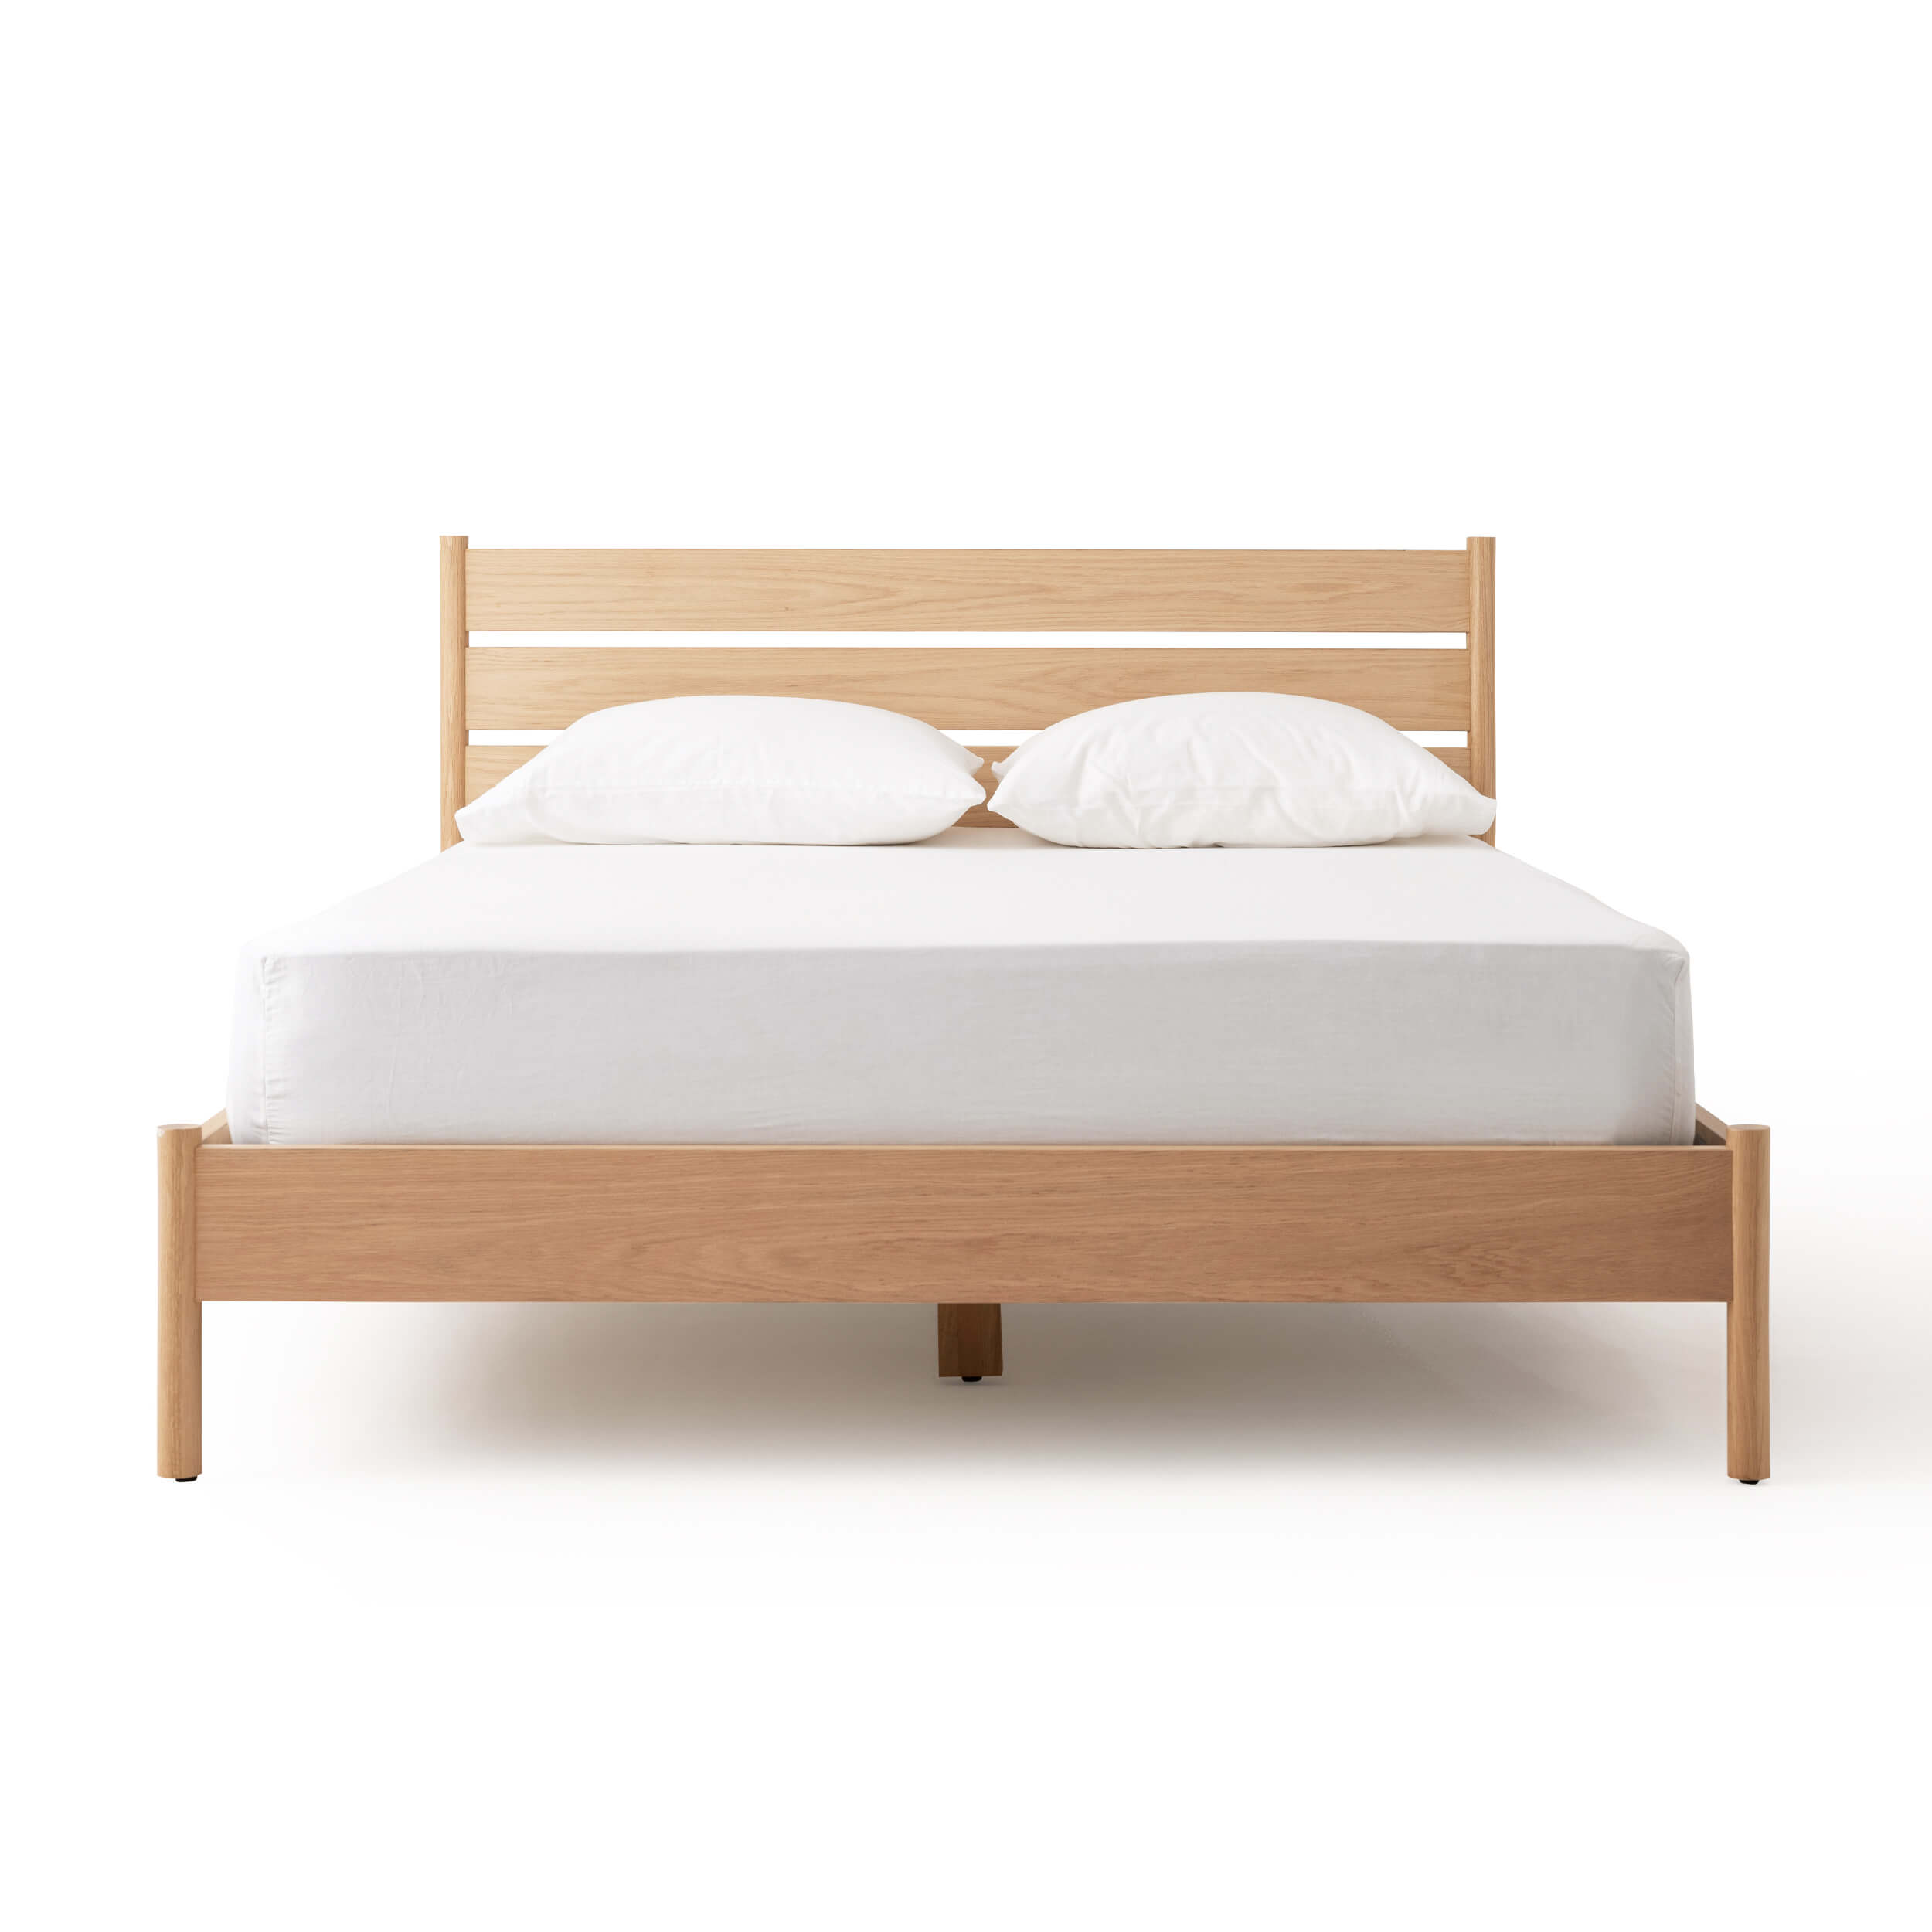 King Queen Bed Frames Modern, Queen Beds And Bed Frames